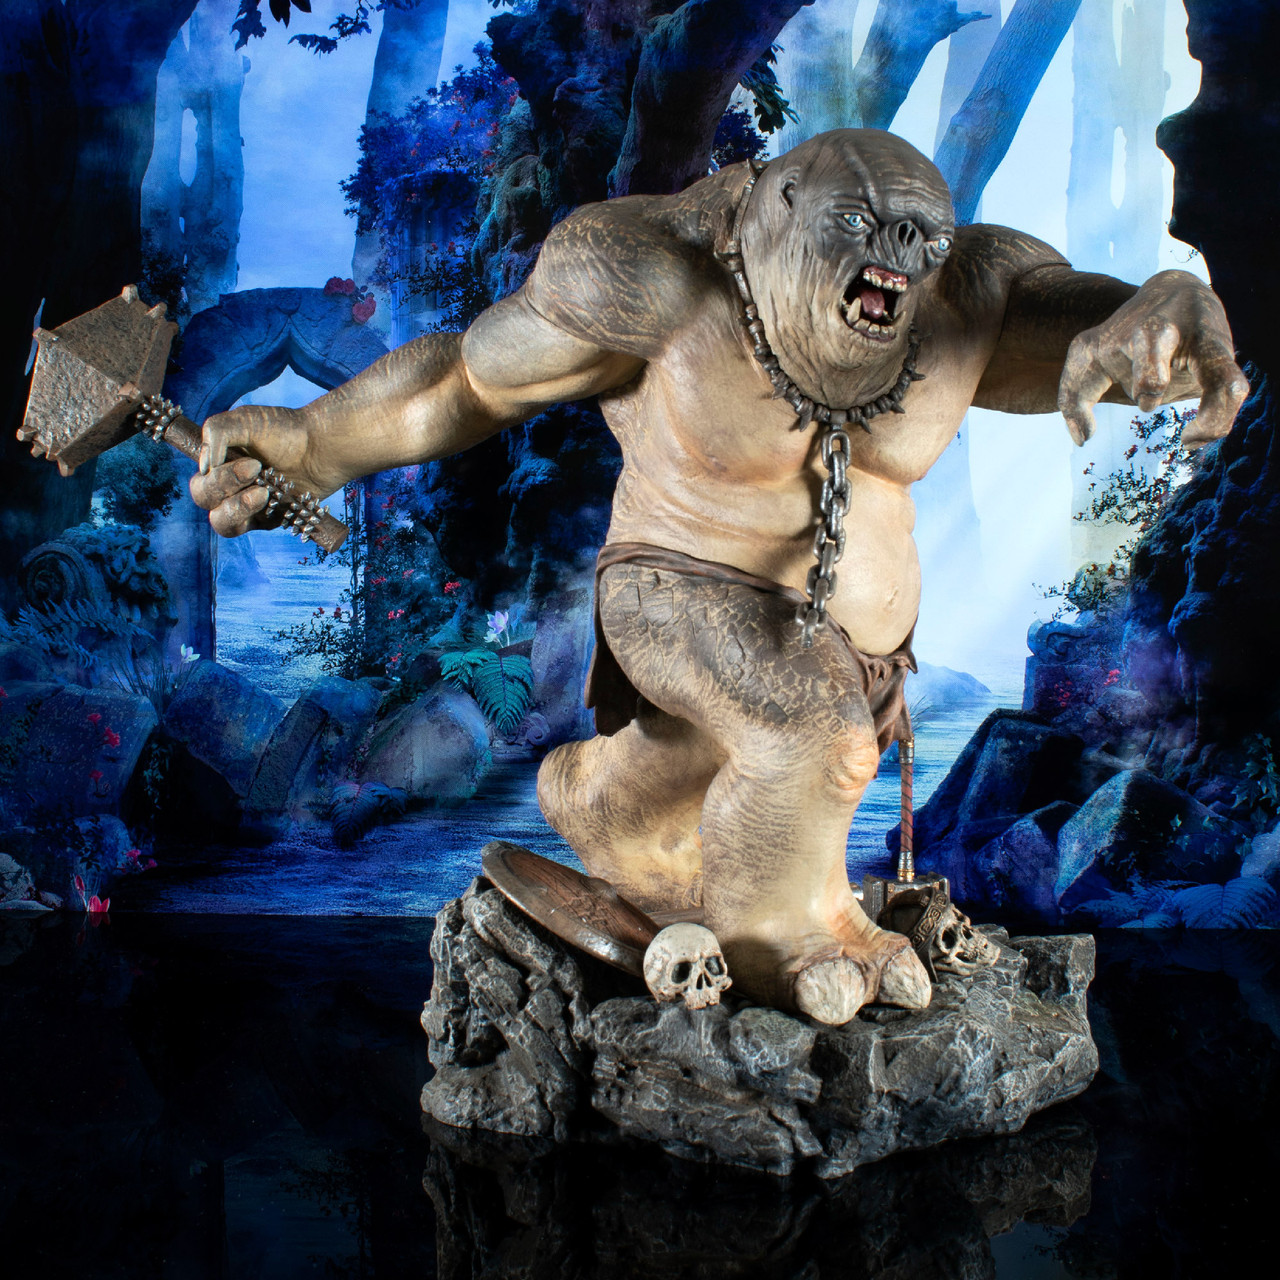 Pre-Order Diamond Gallery Lord of the Rings Cave Troll Deluxe Diorama Statue